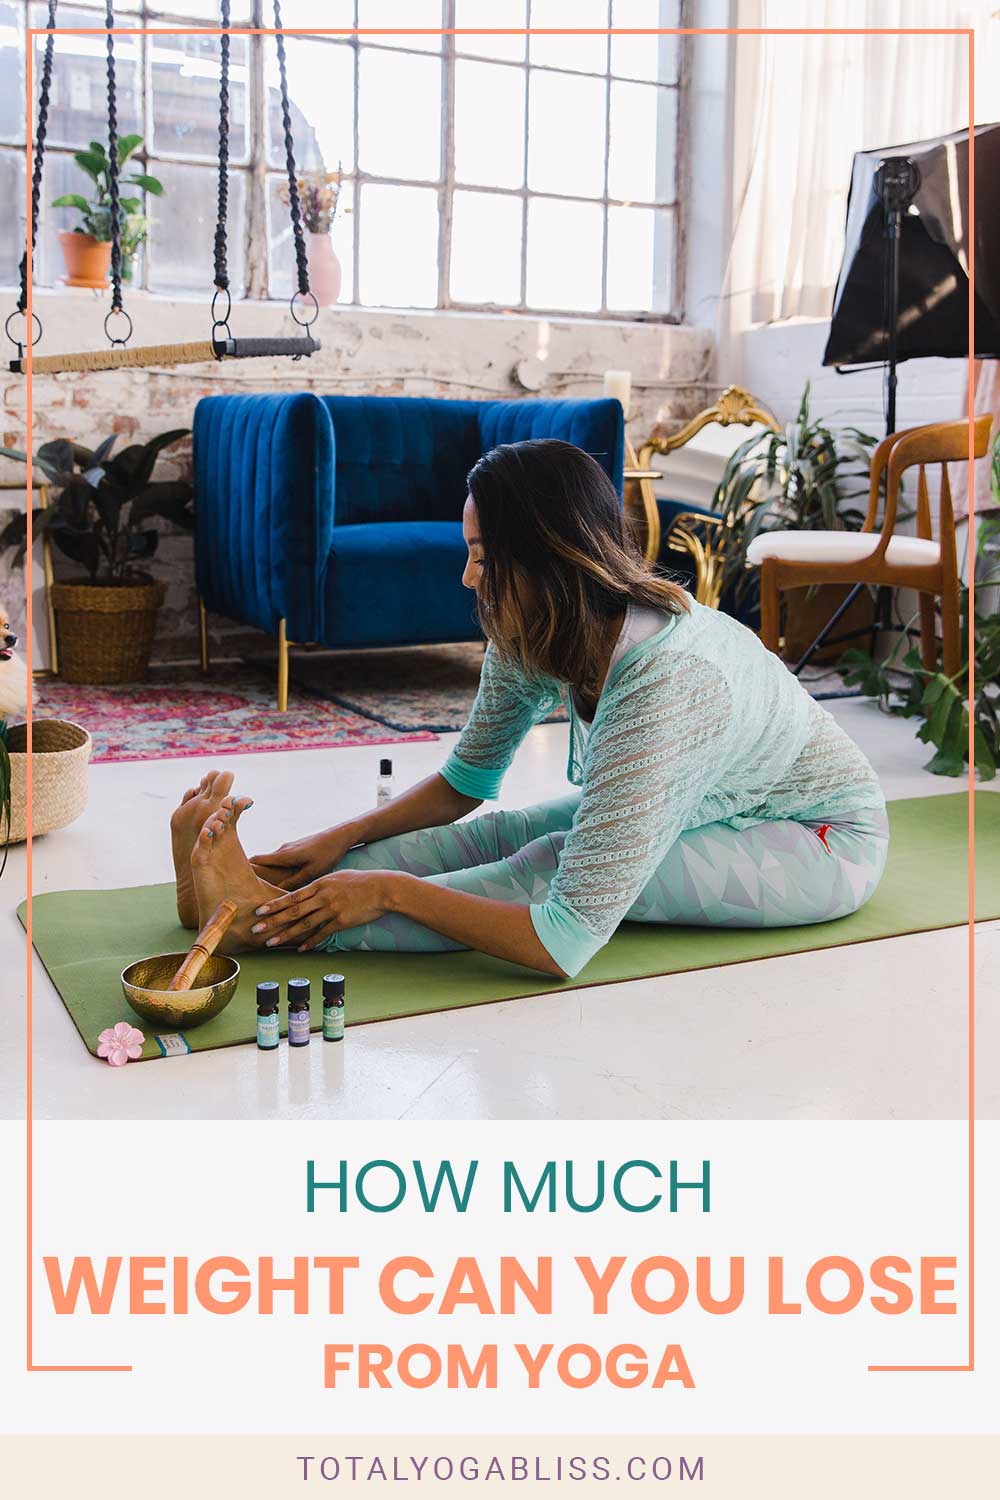 How Much Weight Can You Lose From Yoga?